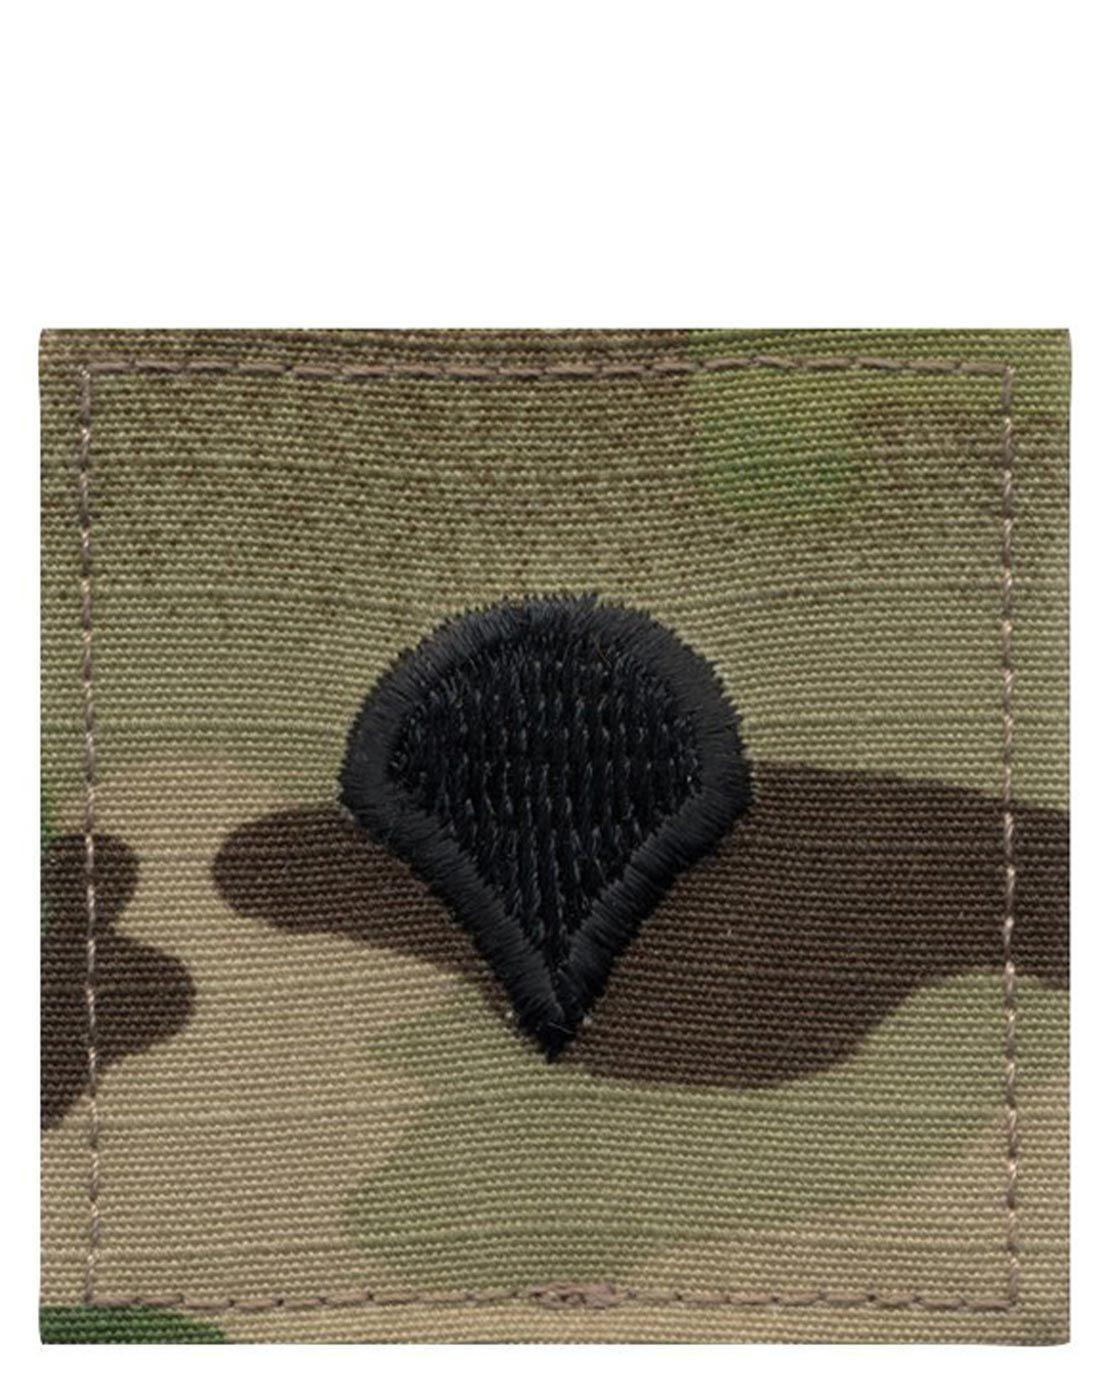 14: Rothco Patch/Gradtegn - Officiel U.S. Specialist - velcro (Multicam, One Size)